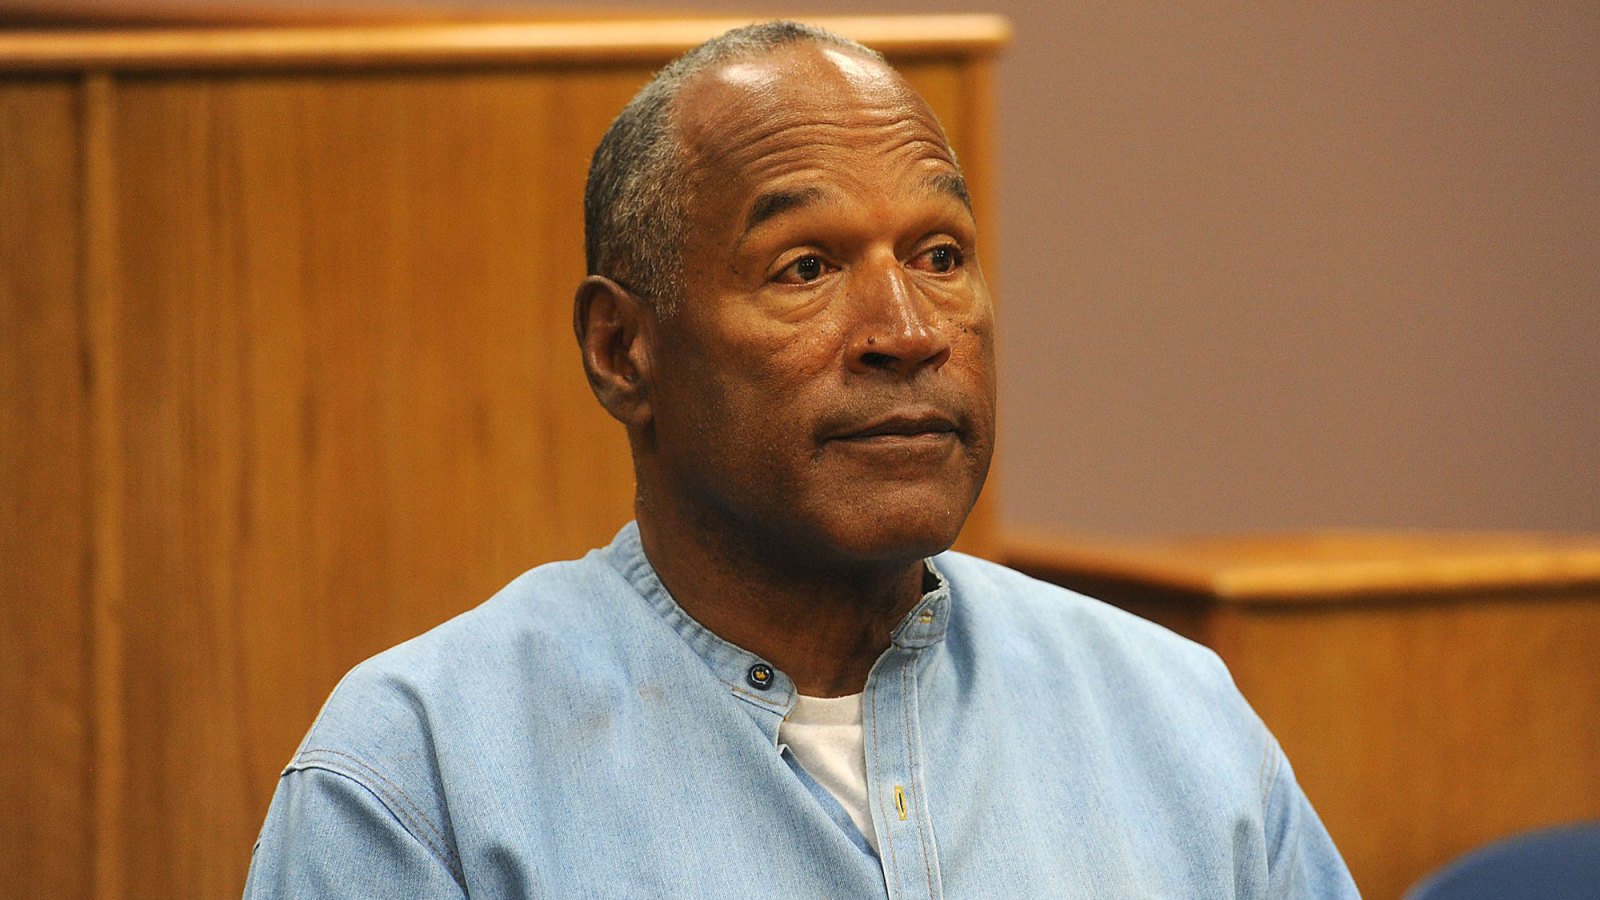 O.J. Simpson Is a Completely Free Man After Early Release From Parole in 2007 Armed Robbery Case